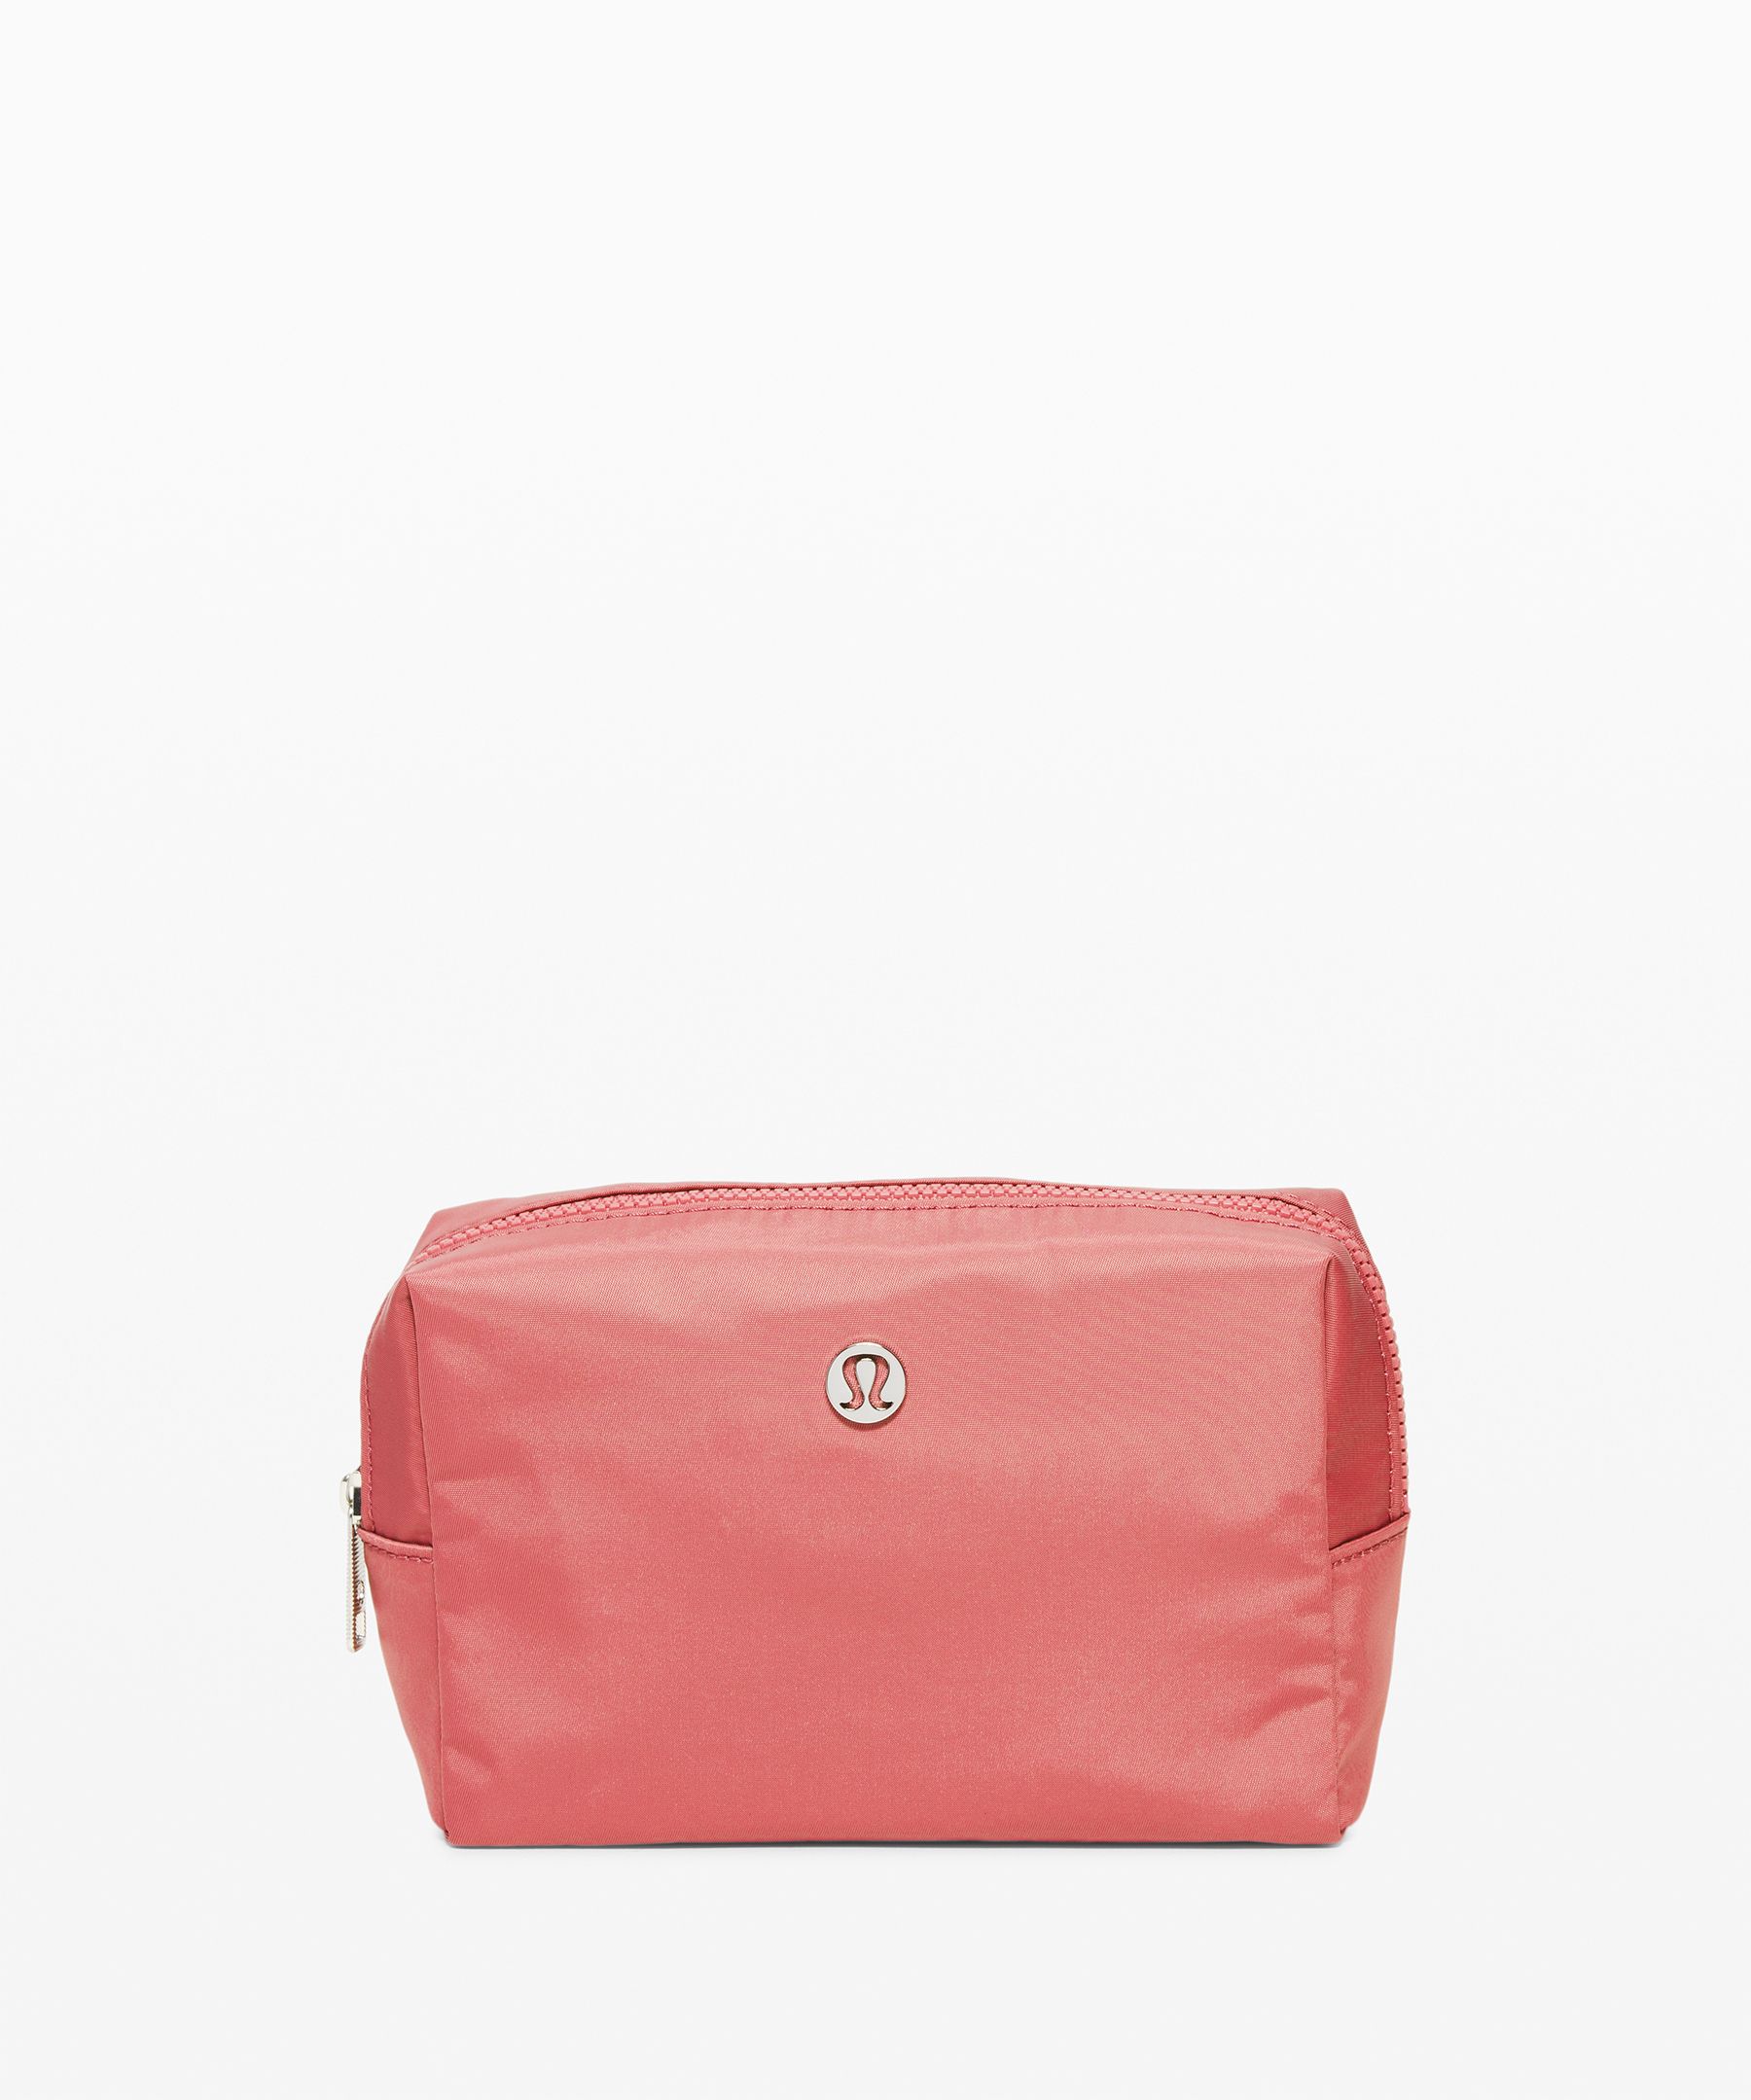 Lululemon All Your Small Things Pouch *mini 2l In Cherry Tint